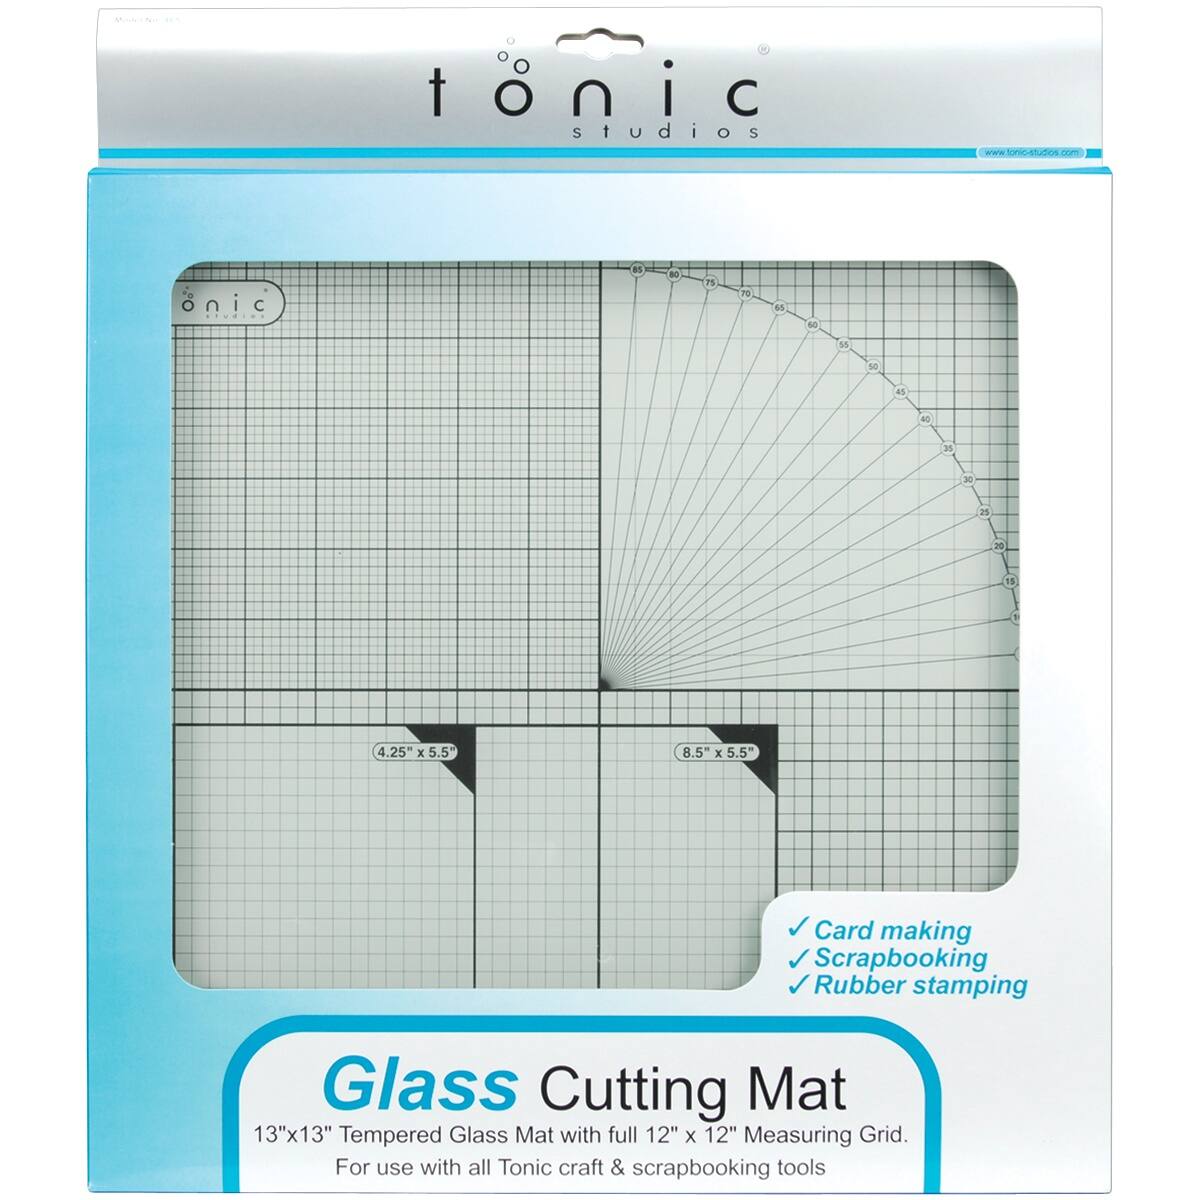 Glass Clay Cutting Mat by Craft Smart | 14 x 14 | Michaels